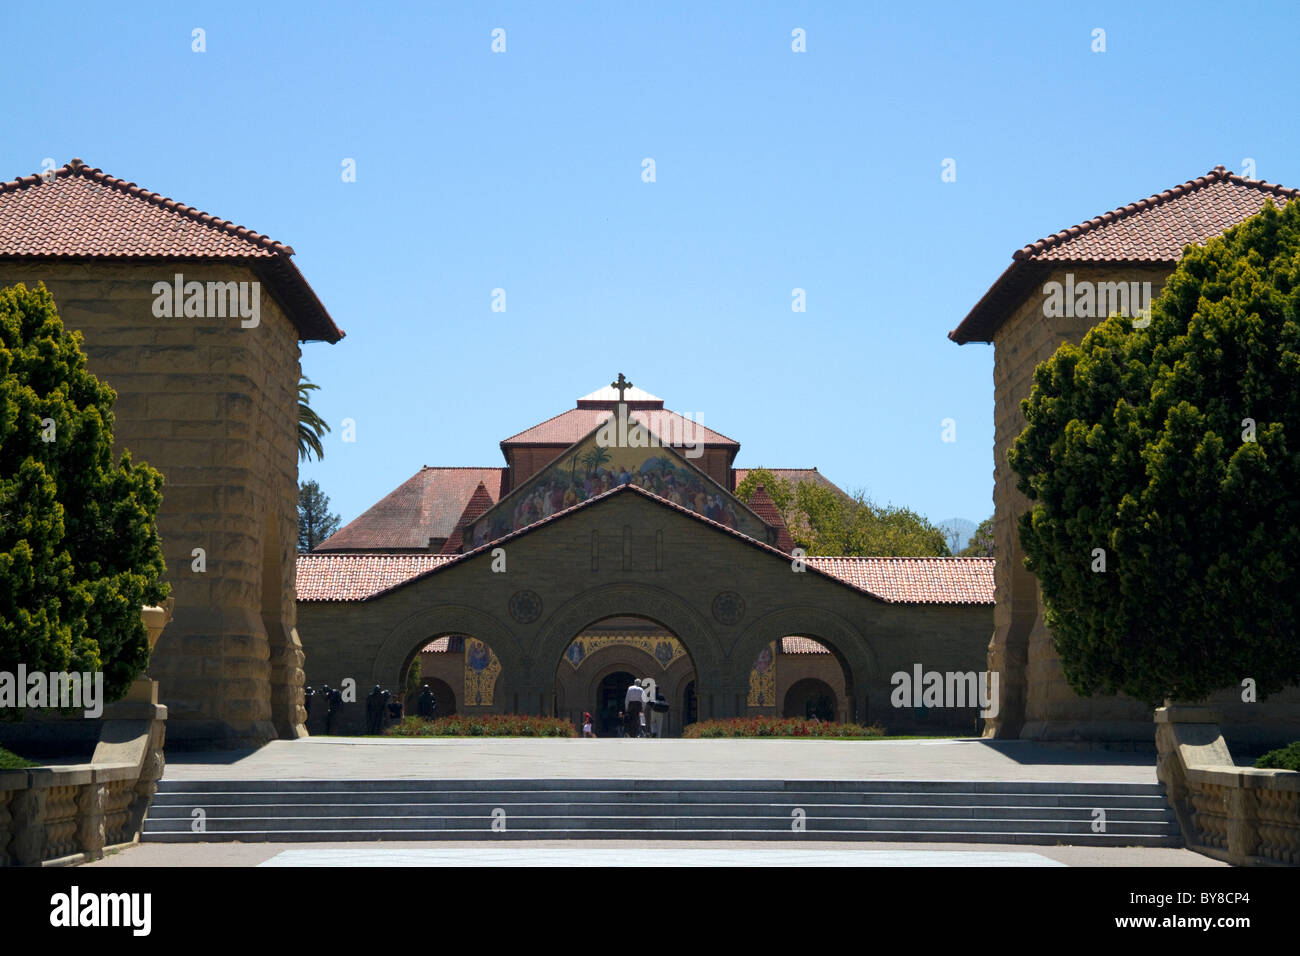 Stanford Memorial Church on the Stanford University campus in Palo Alto, California, USA. Stock Photo